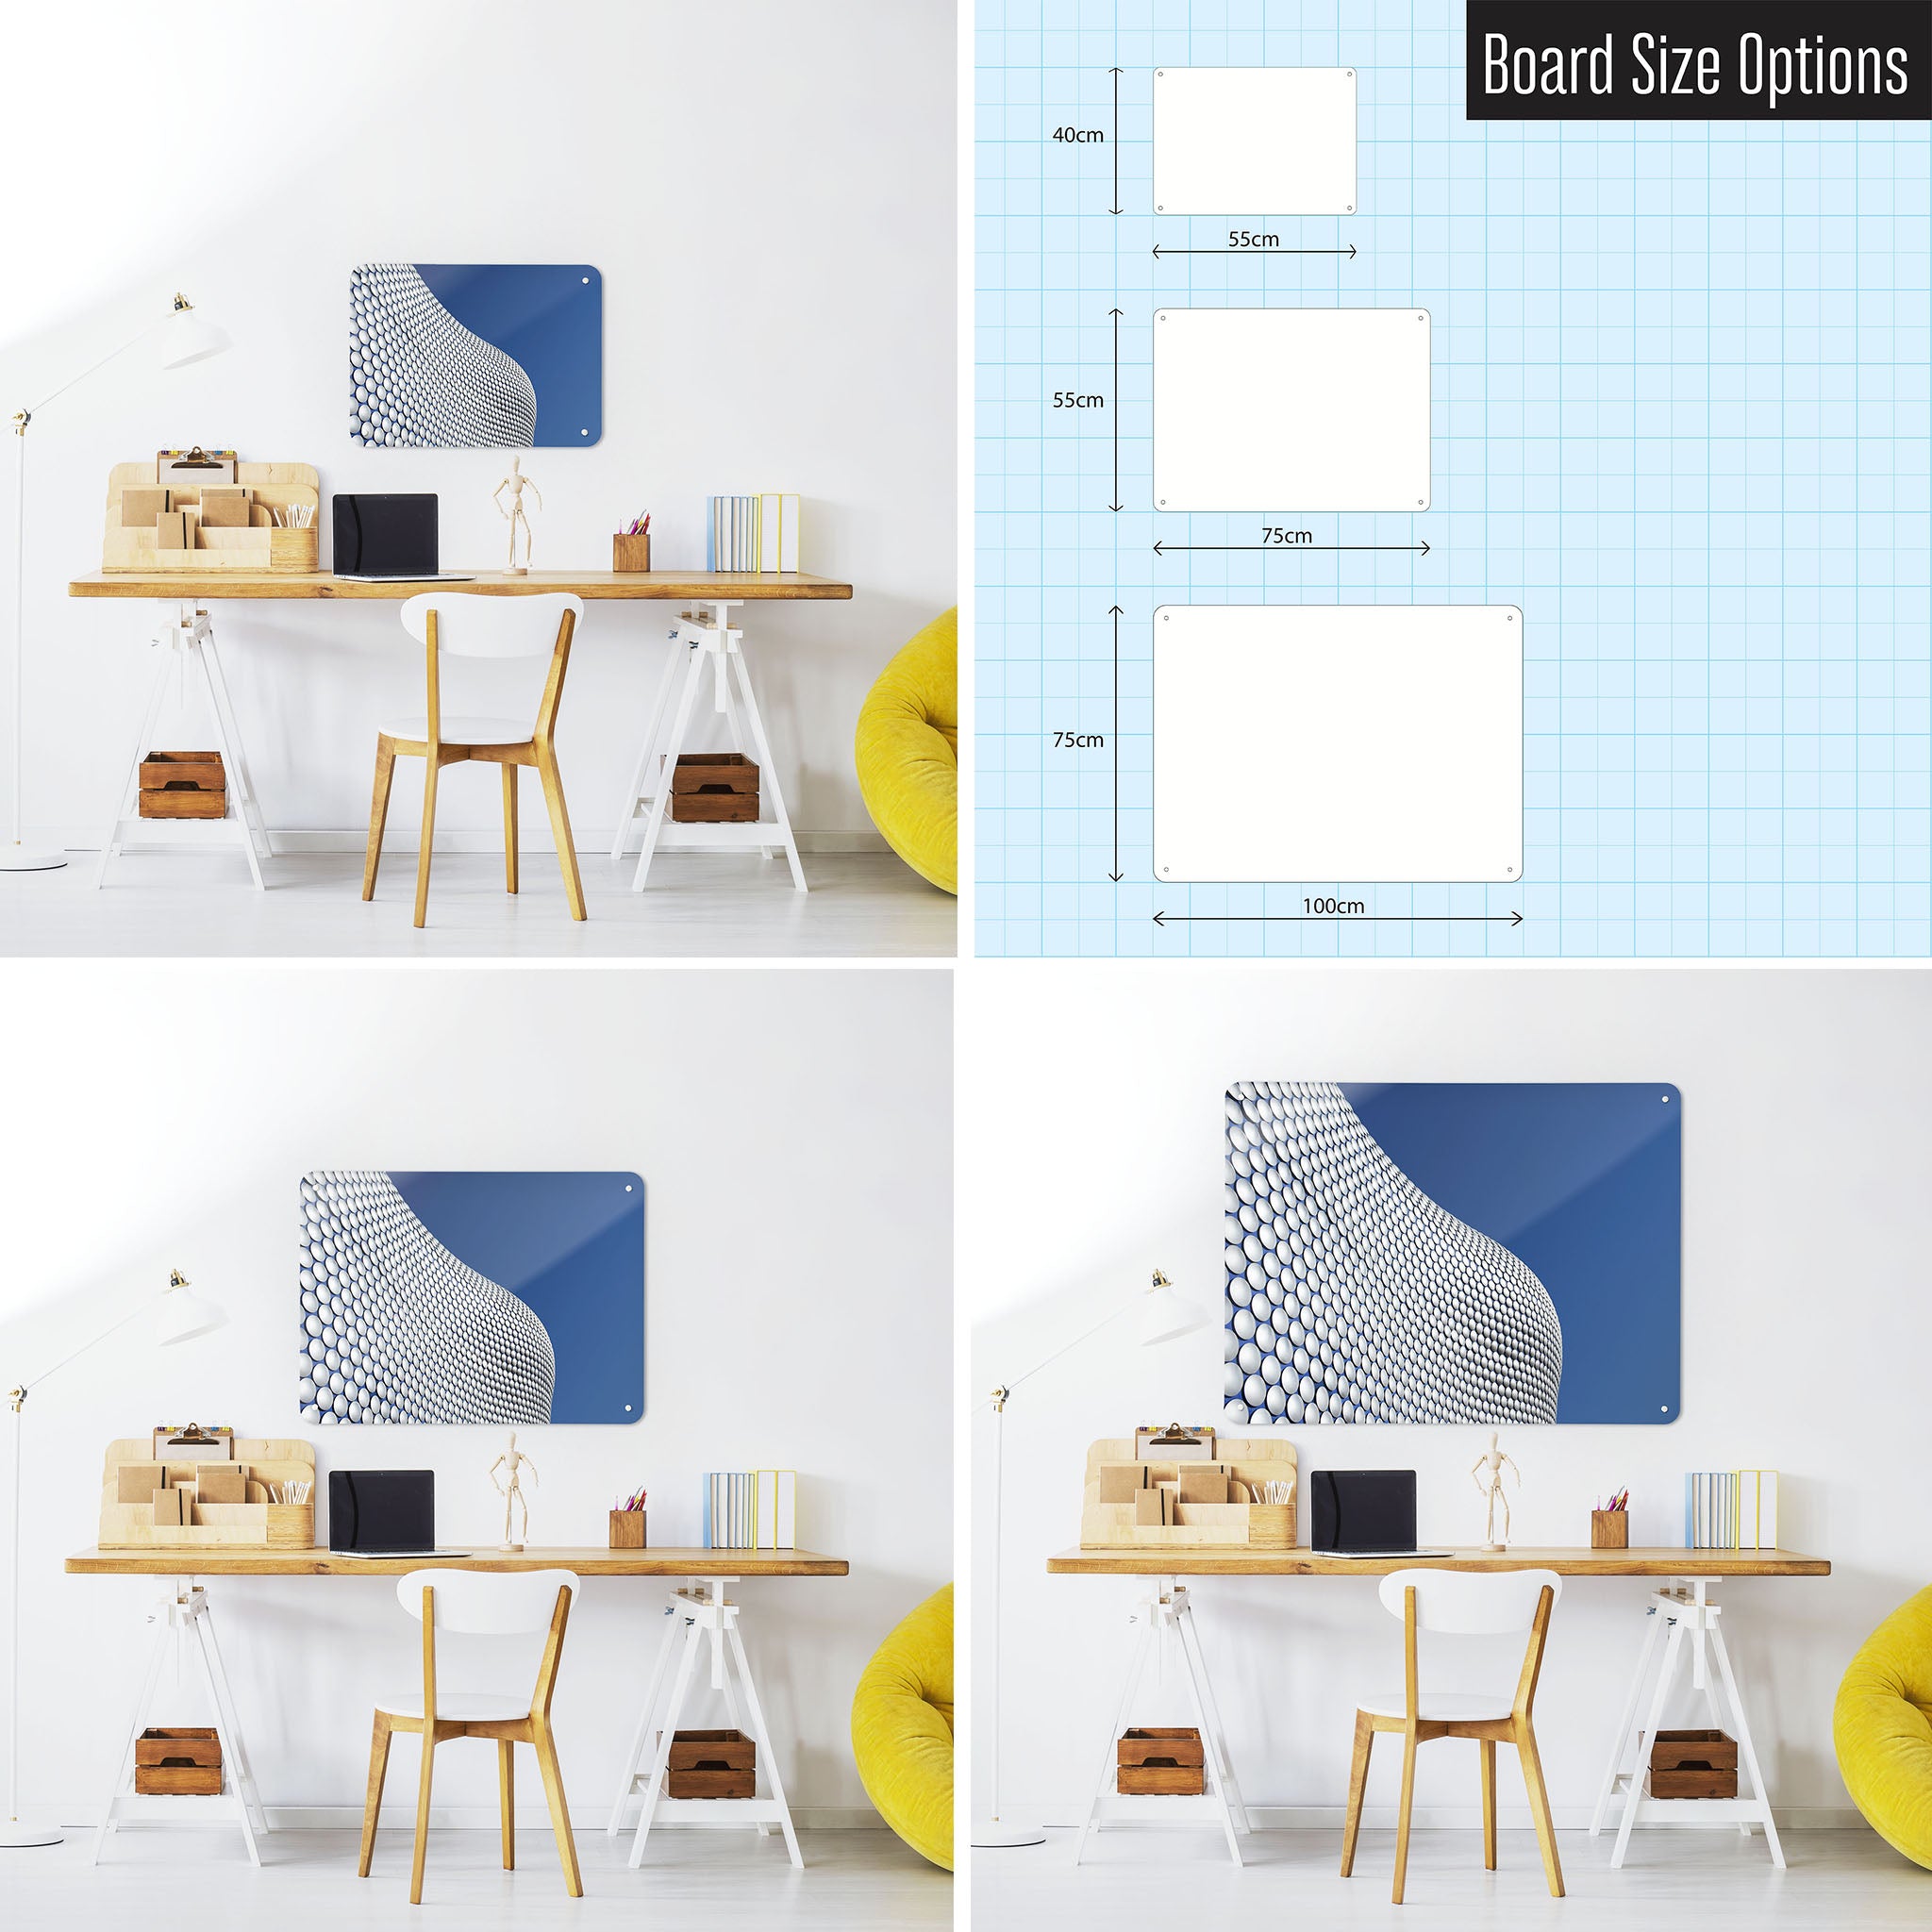 Three photographs of a workspace interior and a diagram to show size comparisons of a Selfridges Building, Birmingham photographic magnetic notice board